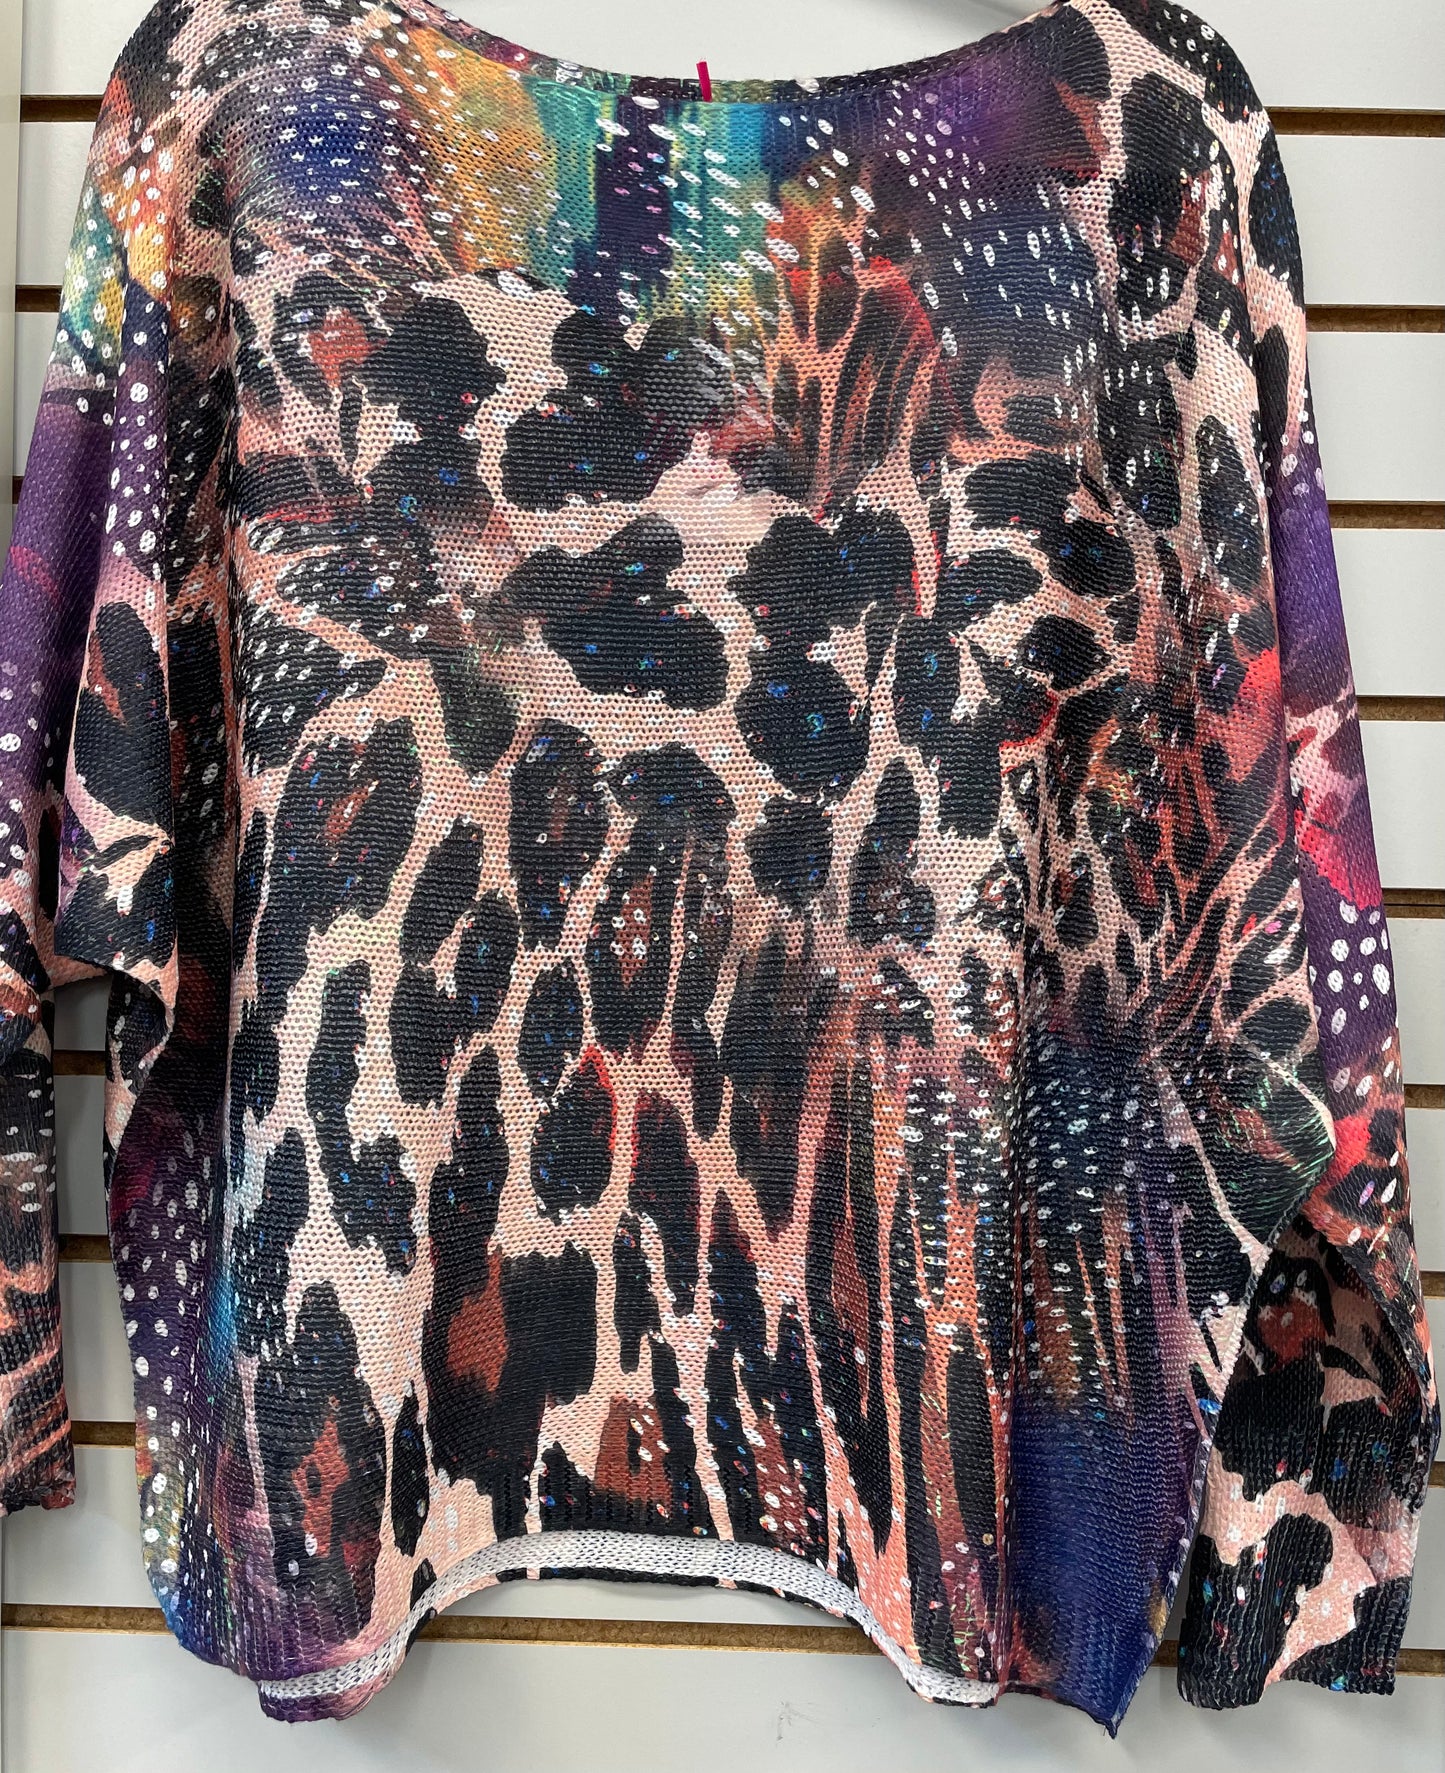 Yolly Spotted Animal Print Top